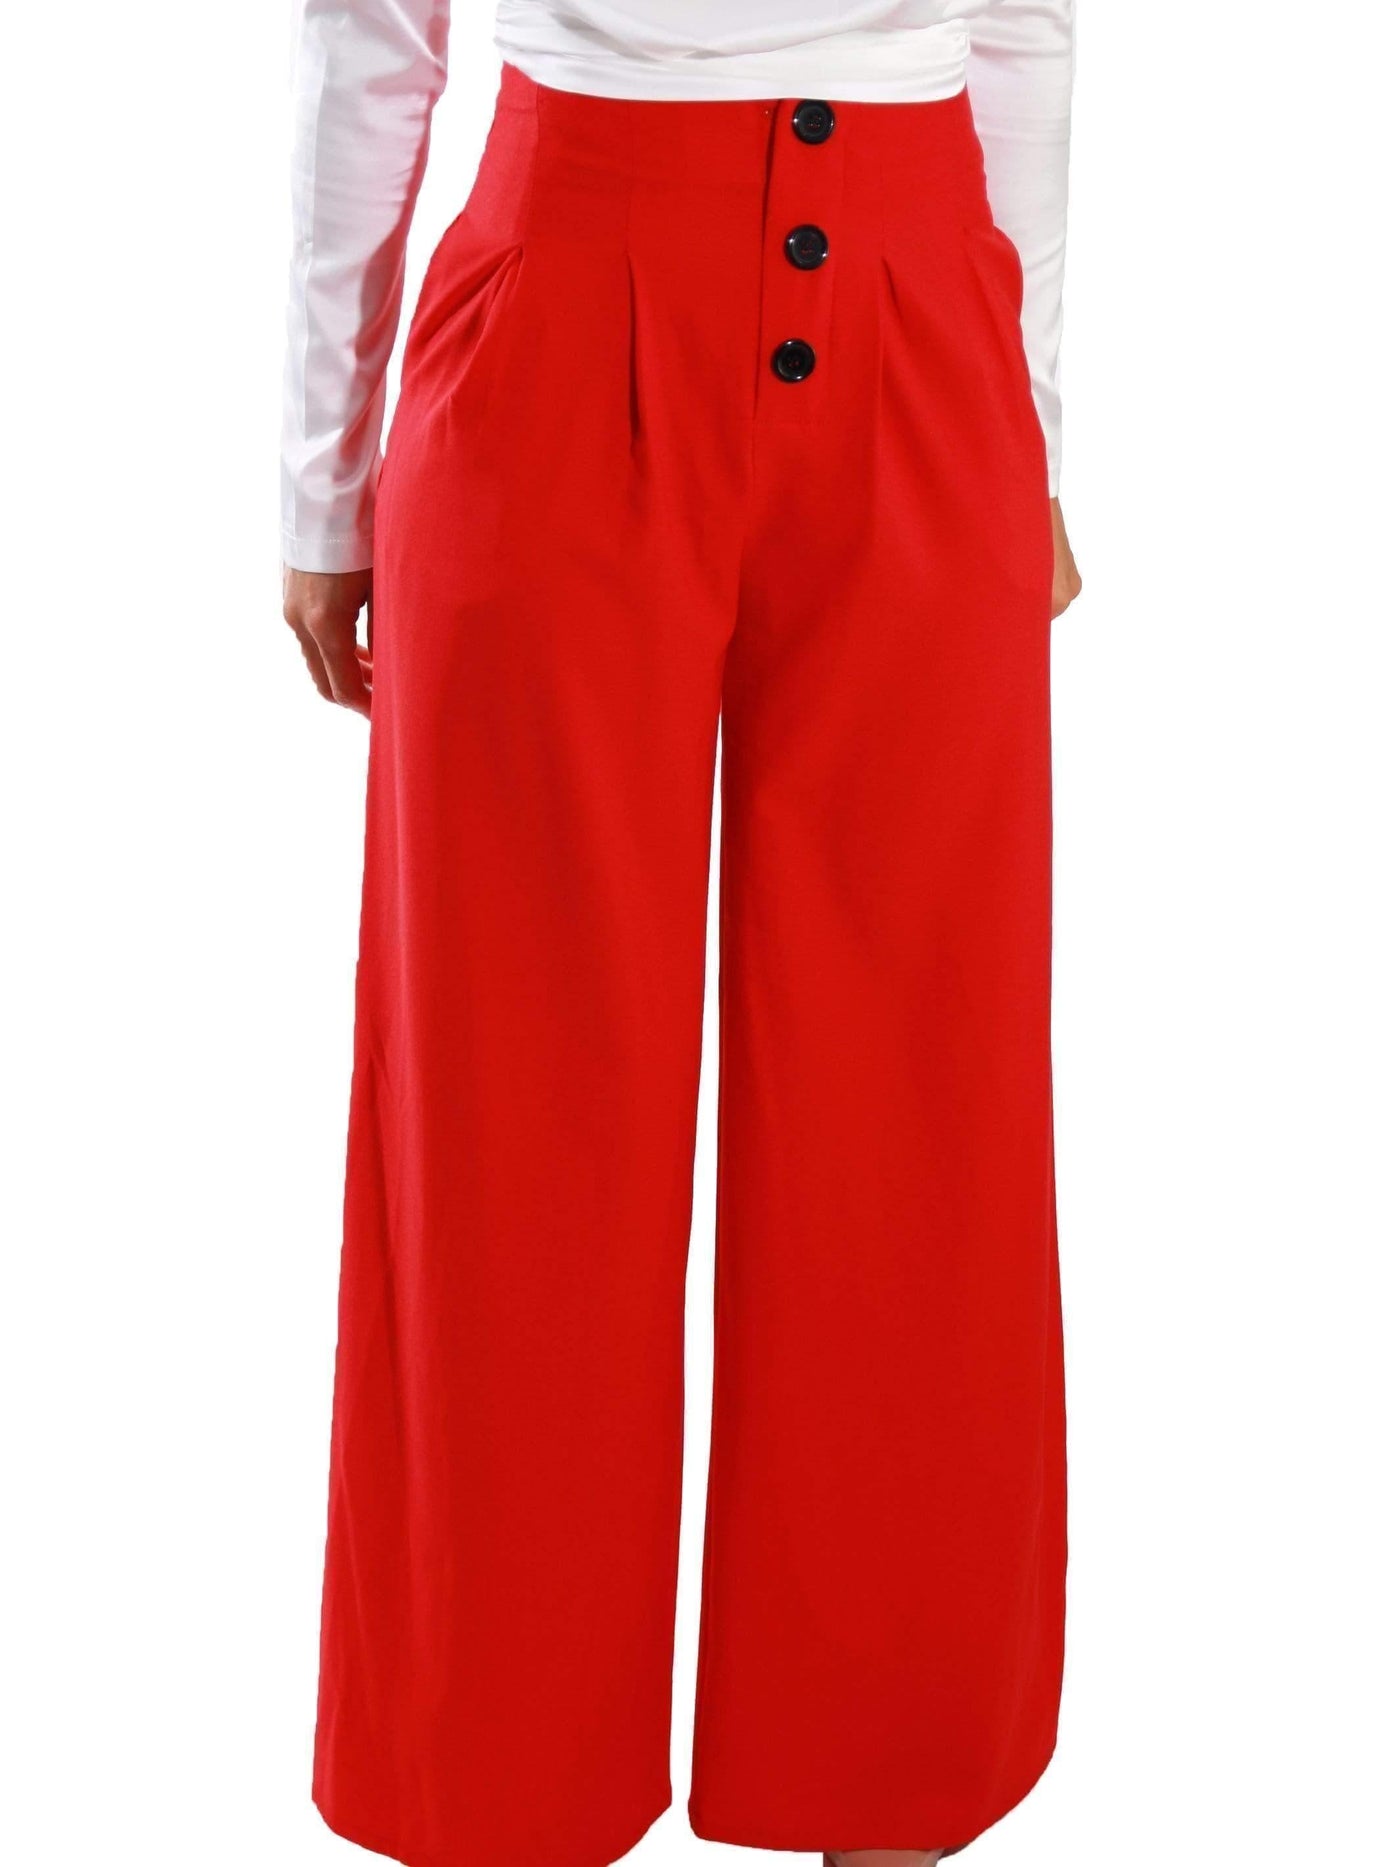 Bold Standard | Red Palazzo Pants - Statement Piece NY _tab_size-chart, Blossom 2021, bold, bold standard, Bottoms, Brooklyn Boutique, chic, Colorful, Fall, Fall Fashion, High Waisted, high waisted pants, Long Pants, Misses, not clearance, Palazzo, Palazzo Fit, palazzo pants, pants, Red, Standard Fall, statement, statement bottoms, Statement Clothing, statement piece, Statement Piece Boutique, statement piece ny, Statement Pieces, Statement Pieces Boutique, Women's Boutique, Workwear Statement Bottoms